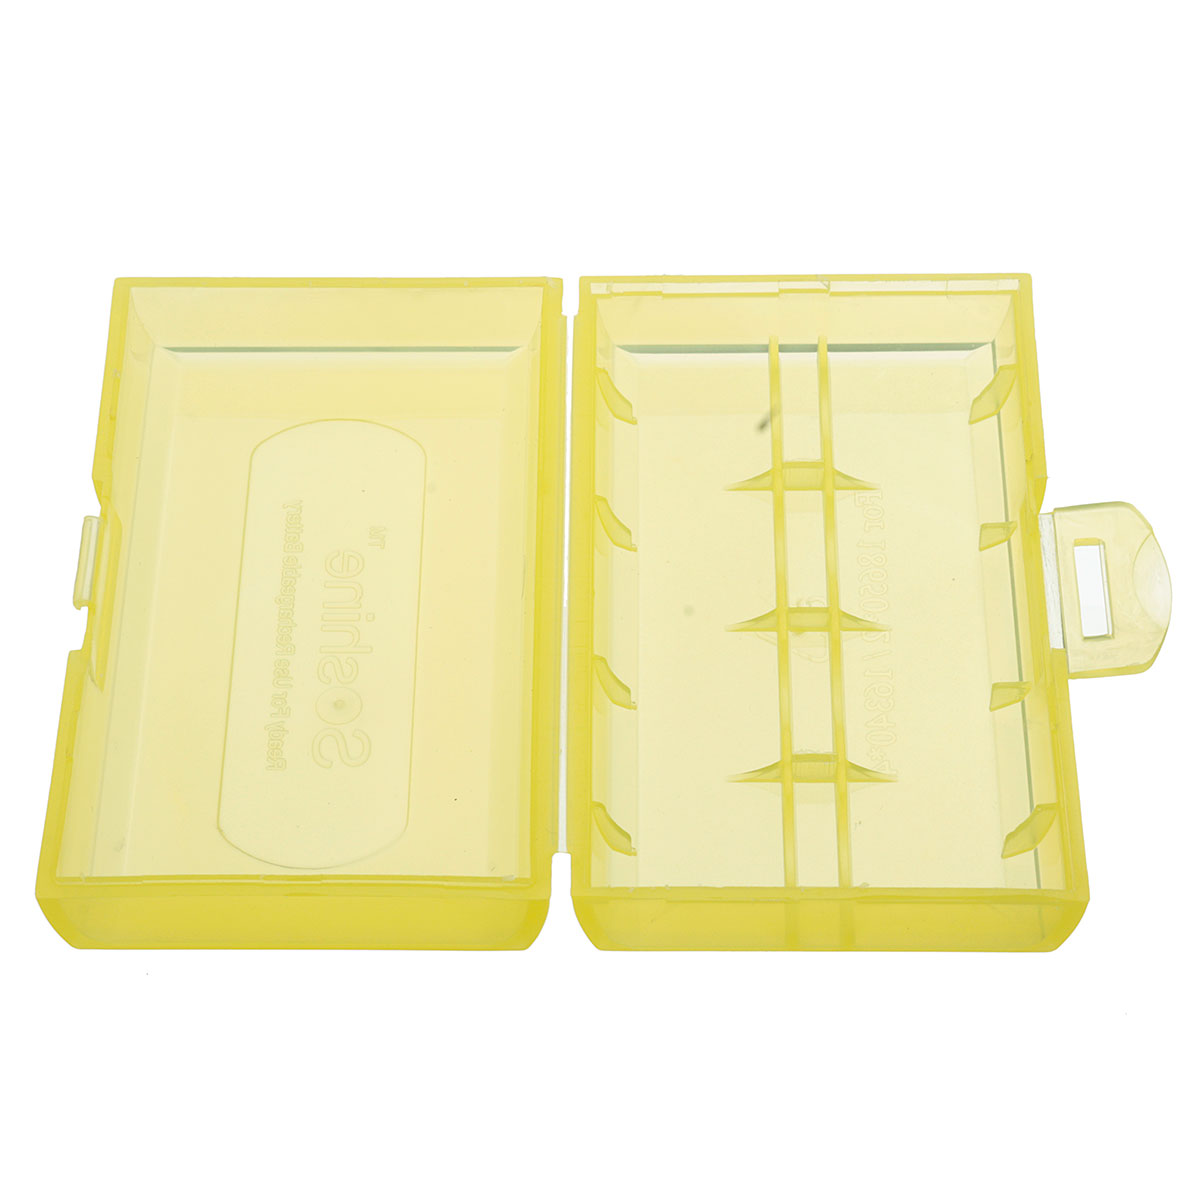 12X-Plastic-Dual-Sleeve-Cover-Case-Storage-Box-for-18650-16340CR123A-Battery-1963674-3